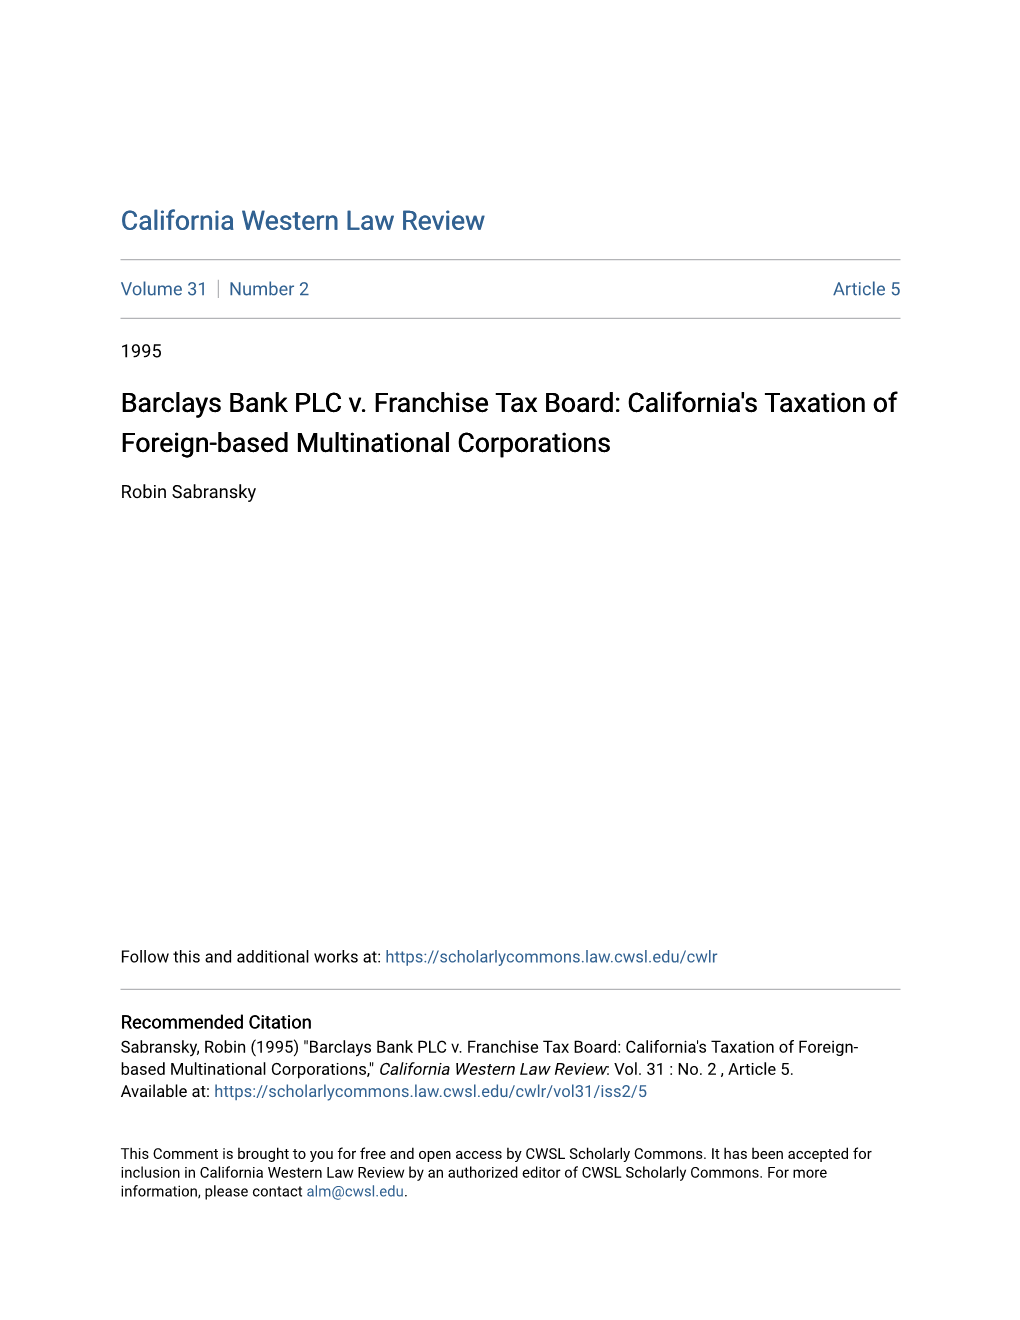 Barclays Bank PLC V. Franchise Tax Board: California's Taxation of Foreign-Based Multinational Corporations